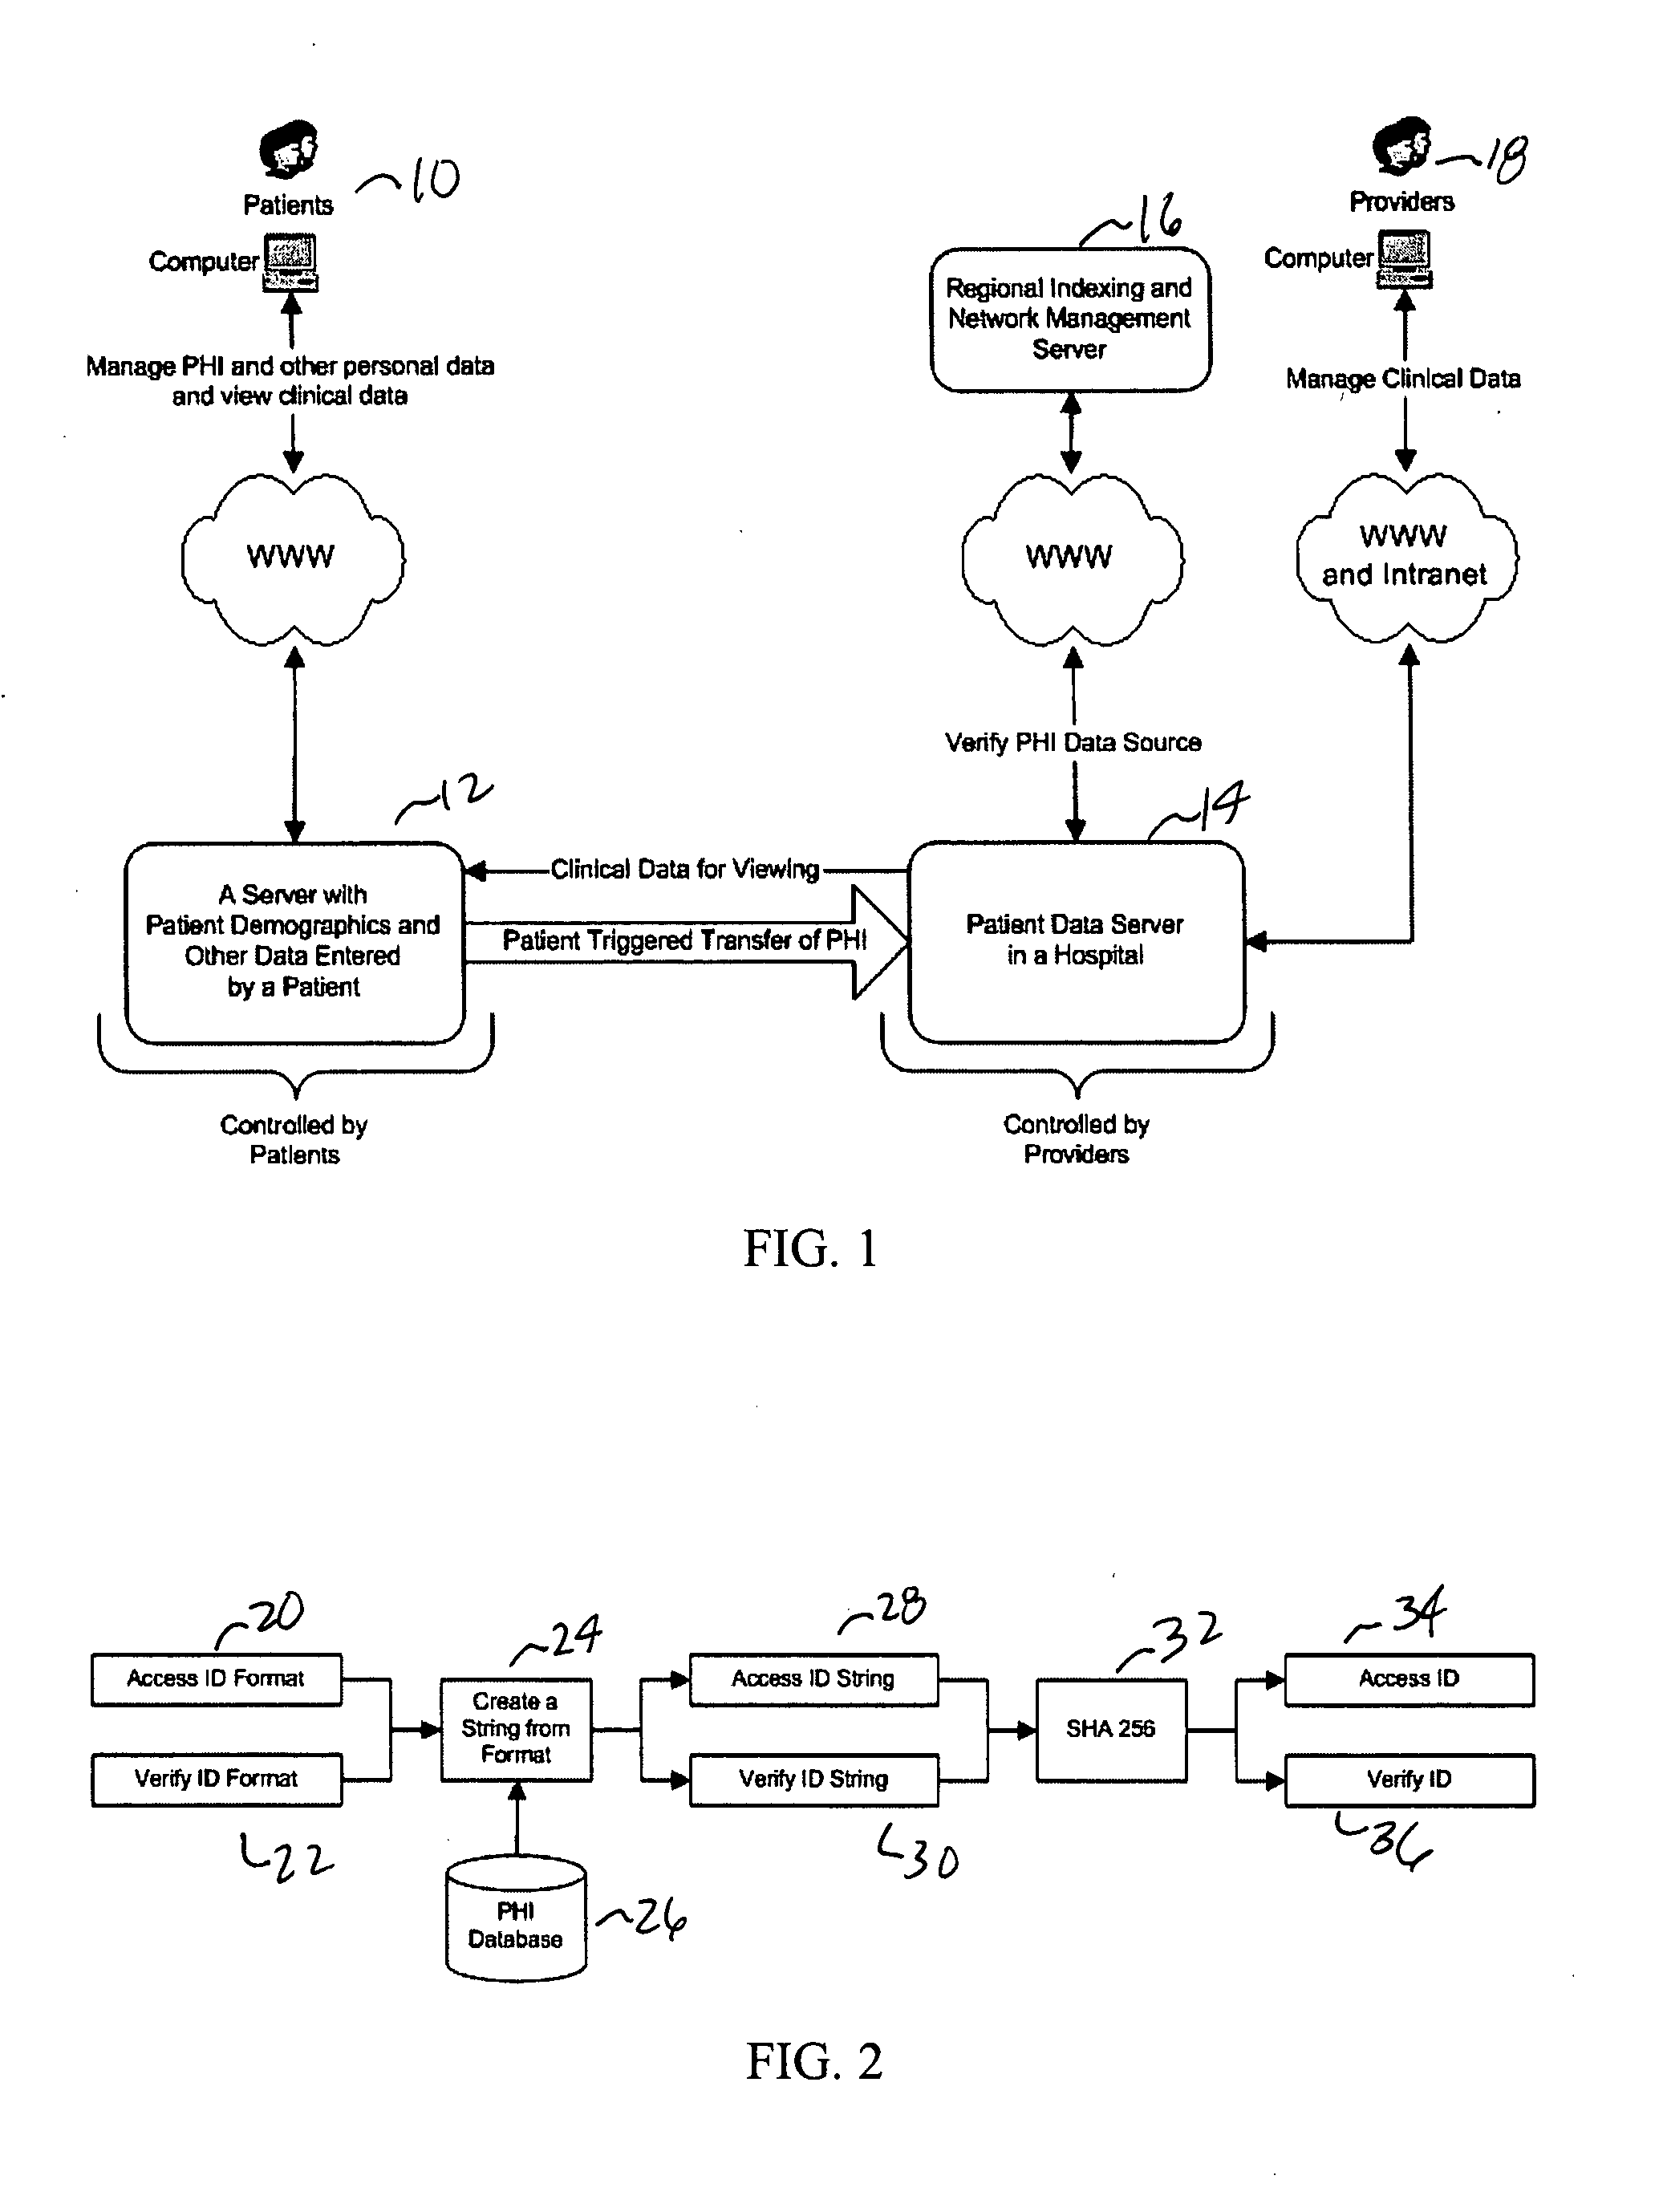 System and method for remote access data security and integrity